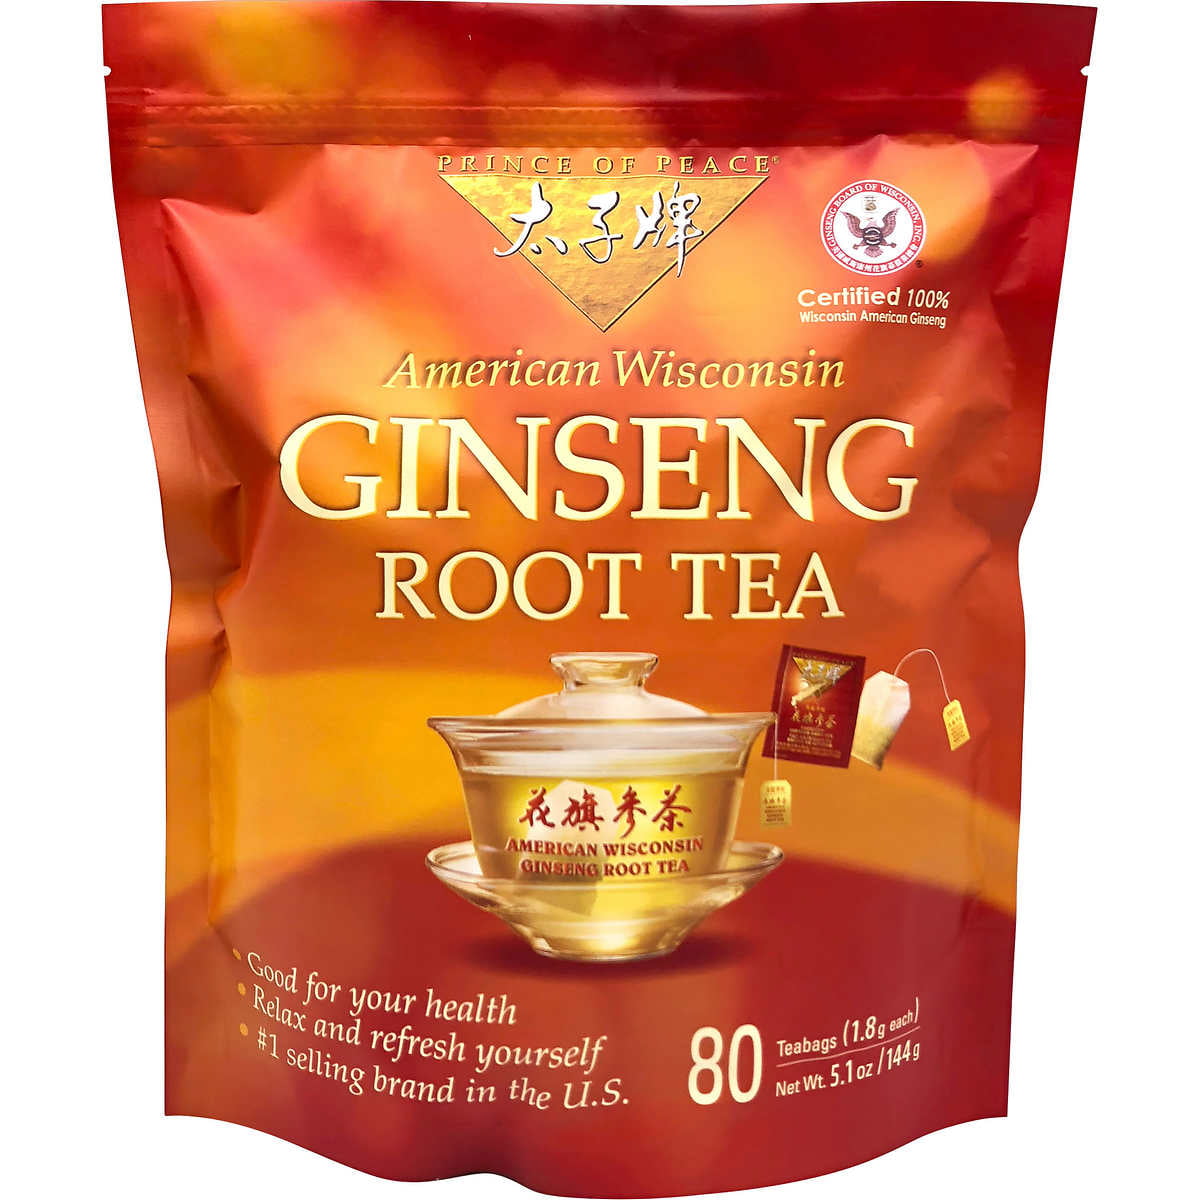 Prince Of Peace Ginseng Root Tea, 80-count